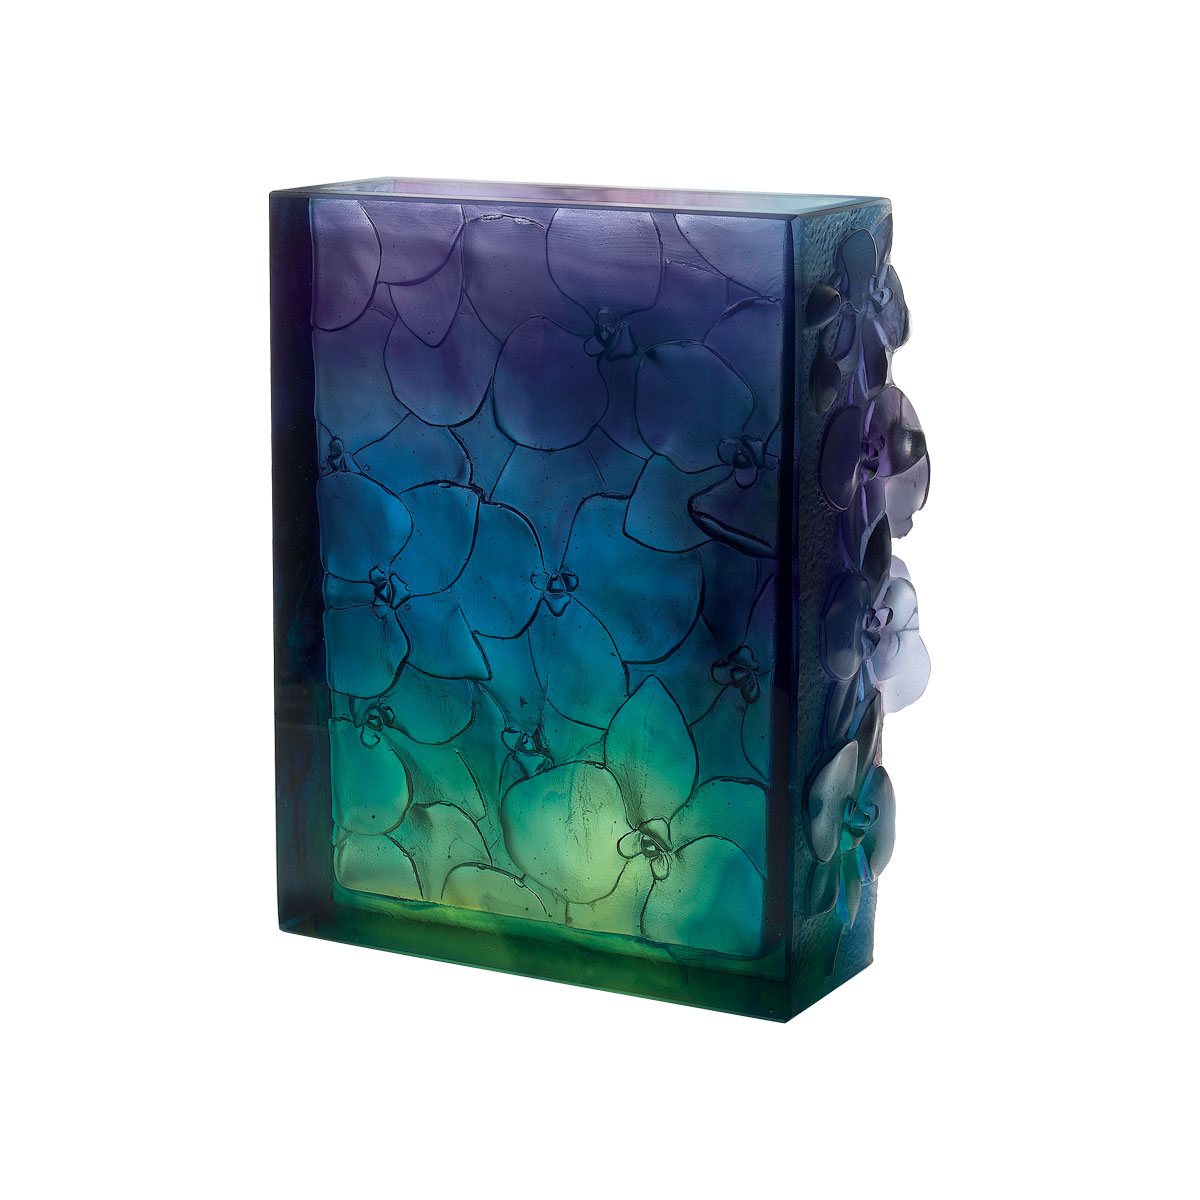 Daum Orchid Vase in Blue, Green, and Purple